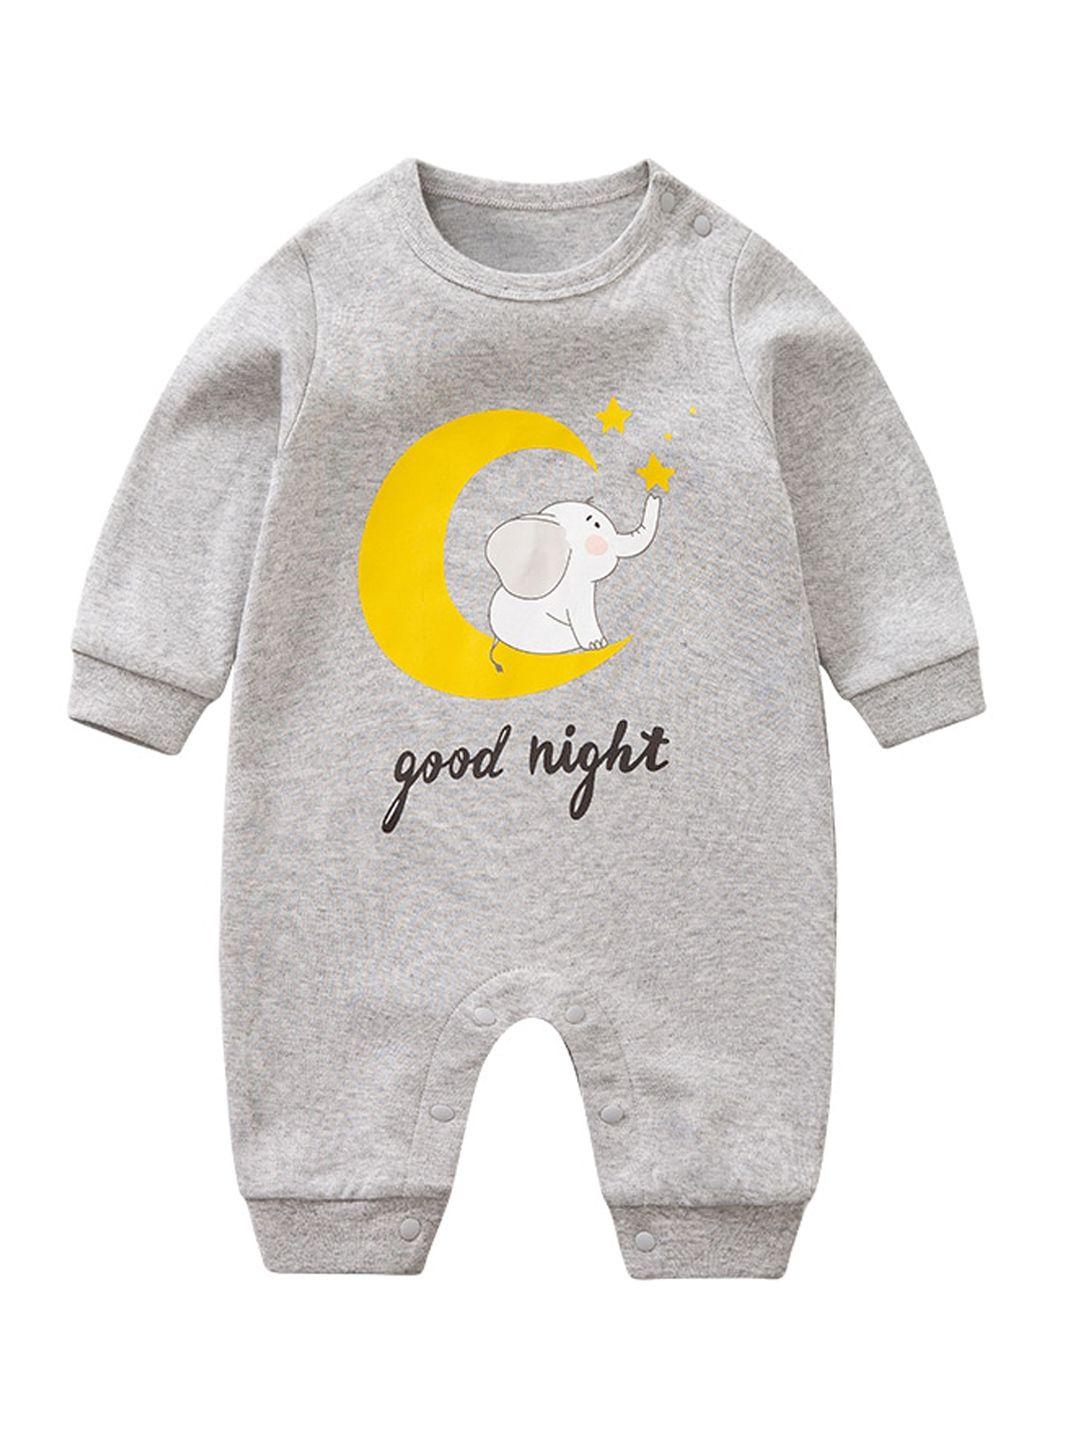 stylecast infant boys grey & yellow graphic printed cotton rompers